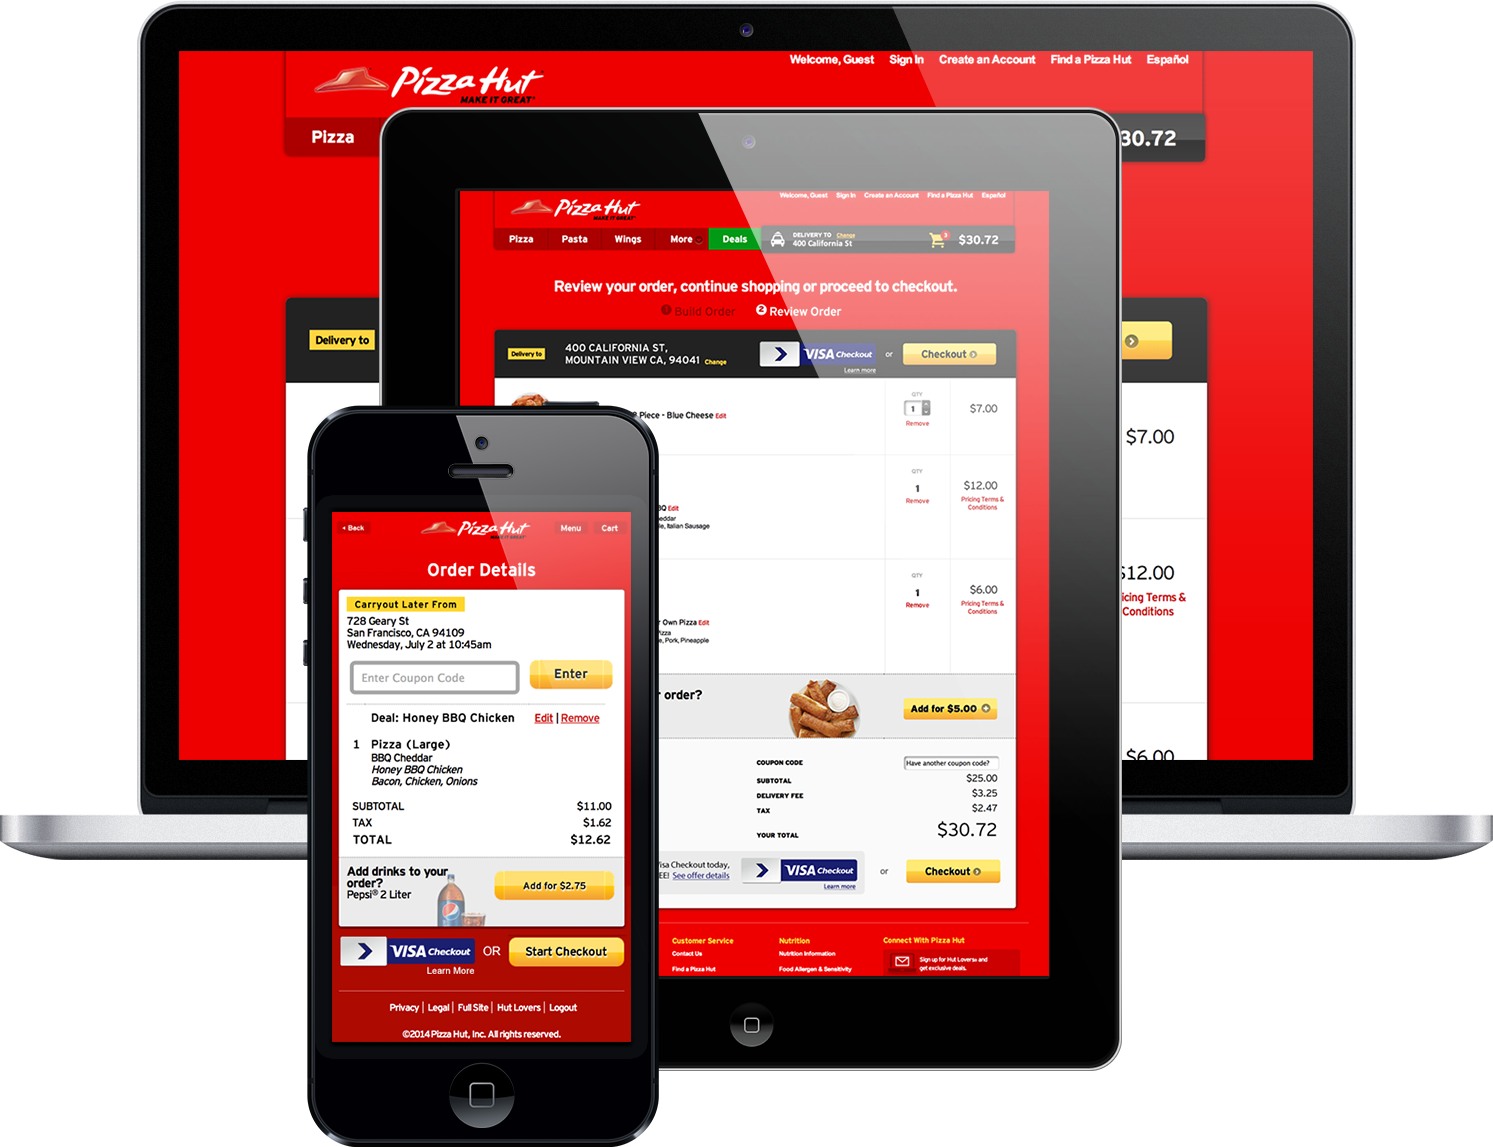 A smart phone, tablet, and laptop displaying a Visa Checkout option on the Pizza Hut website.